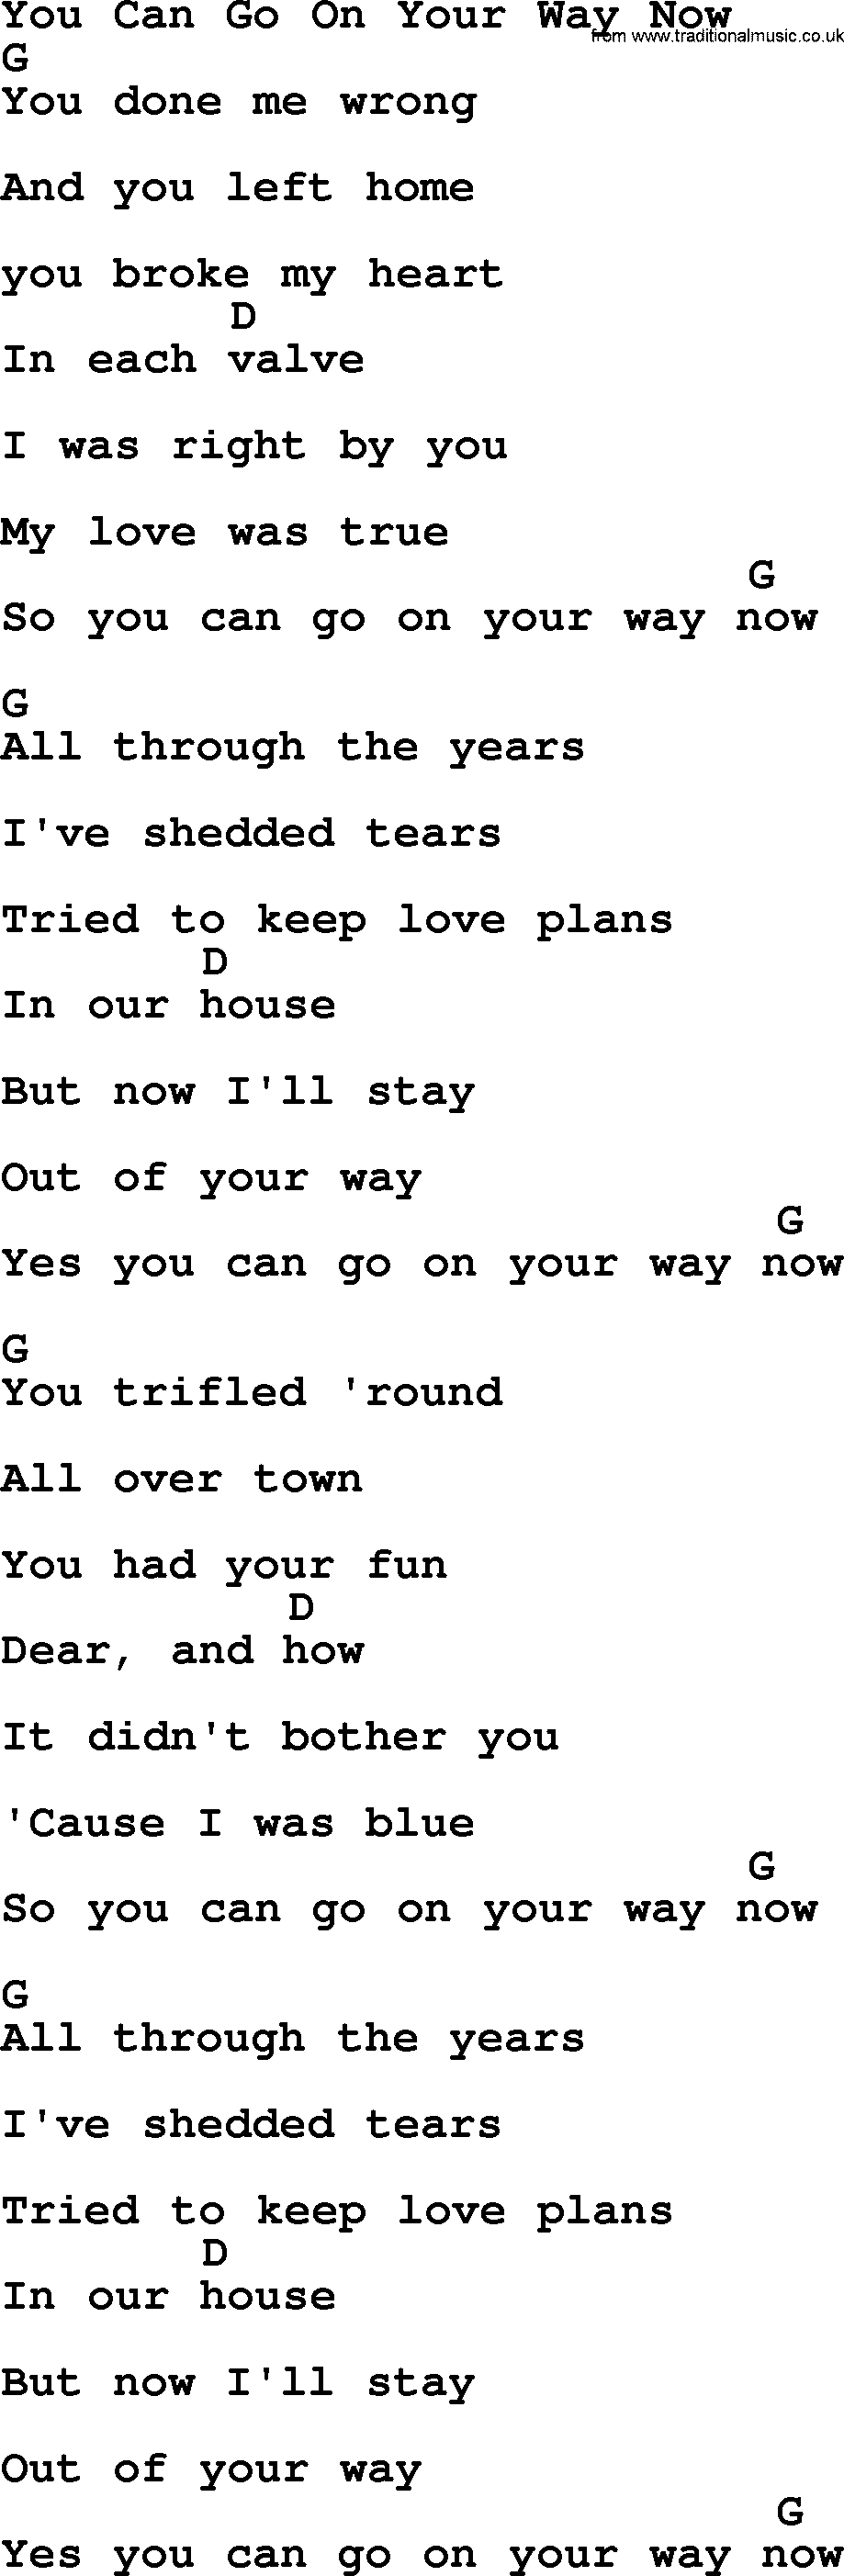 Bluegrass song: You Can Go On Your Way Now, lyrics and chords